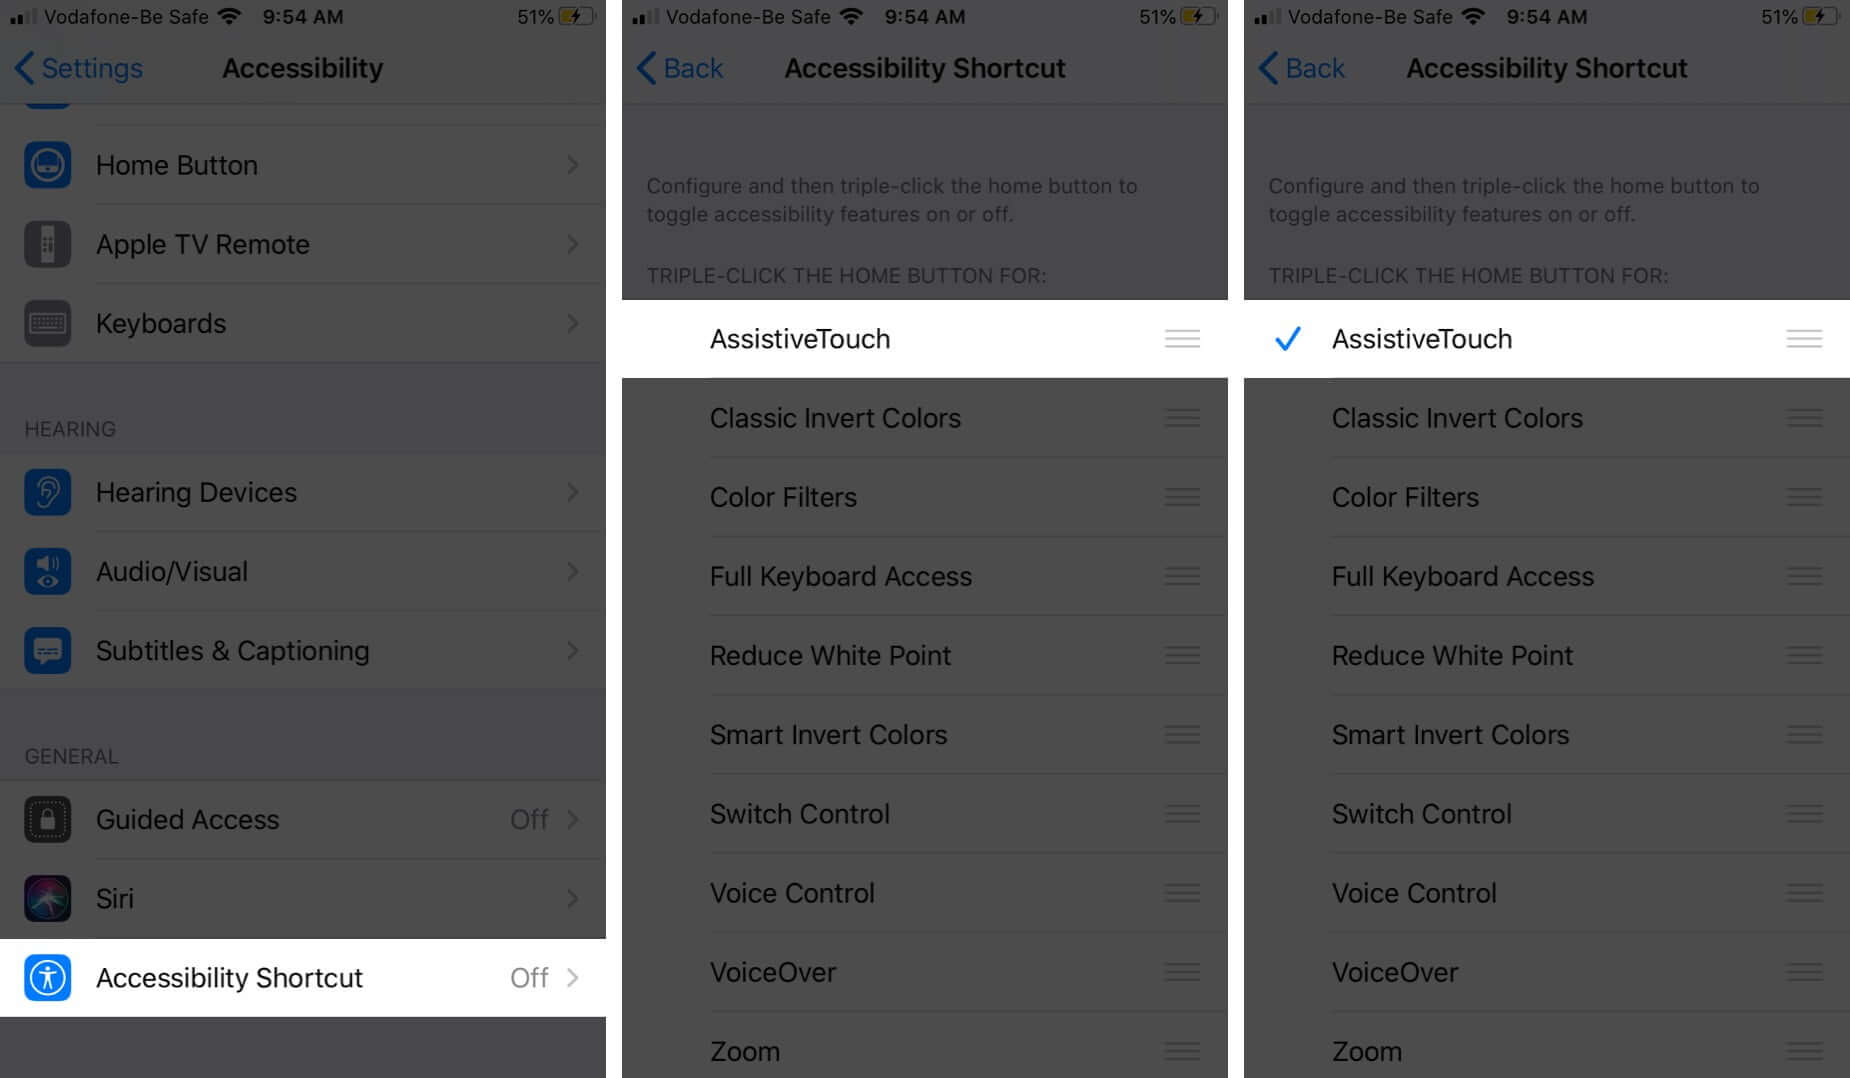 Enable AssistiveTouch Using Accessibility Shortcut